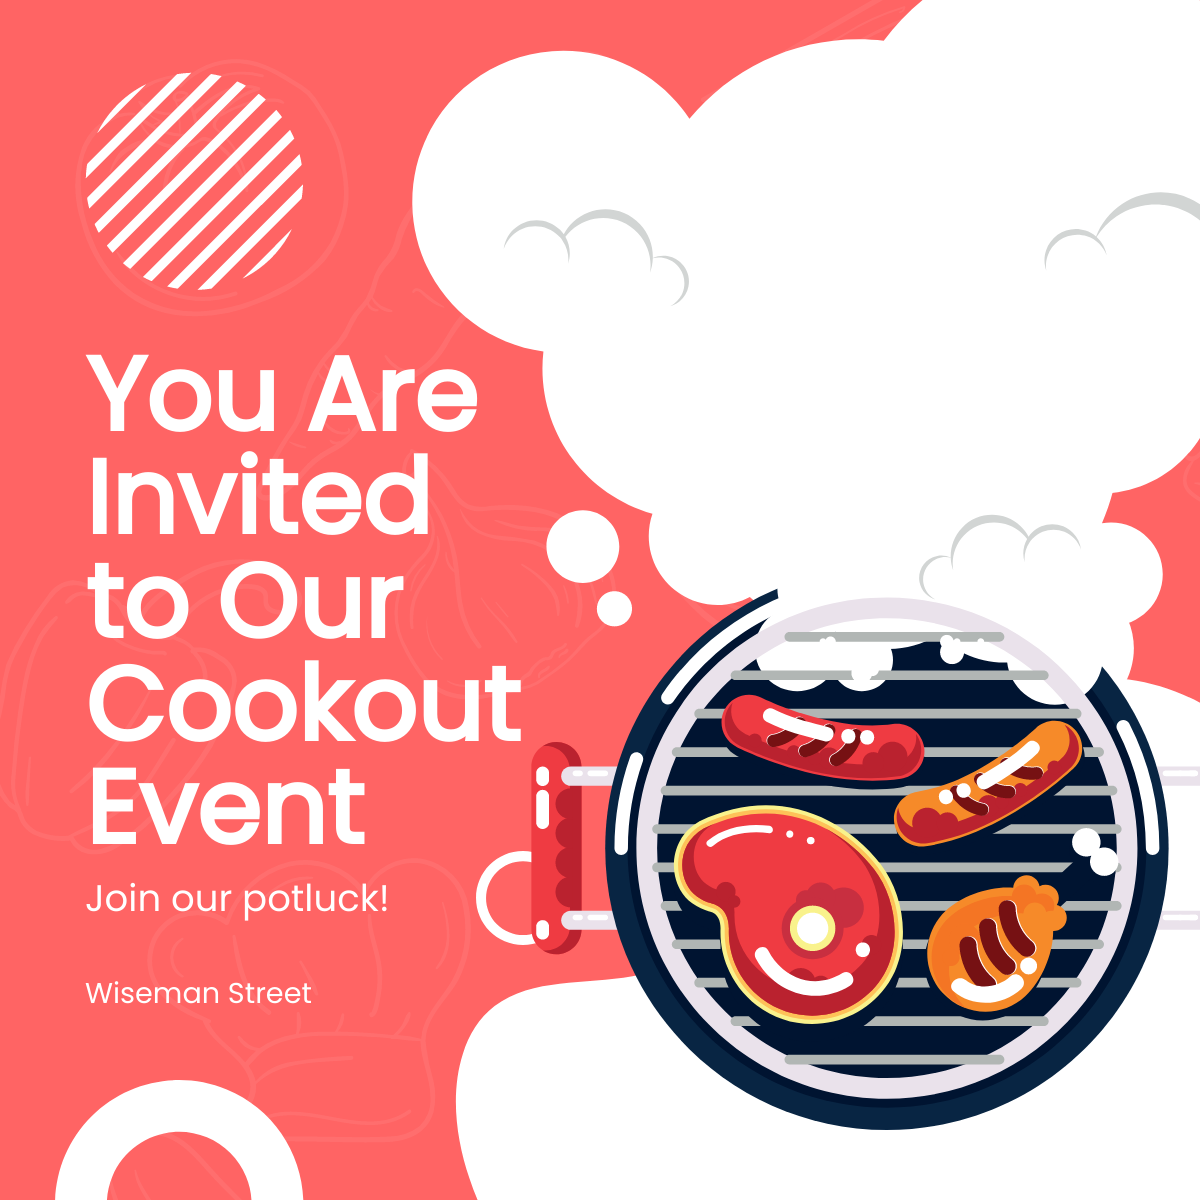 Free Cookout Event Linkedin Post Template